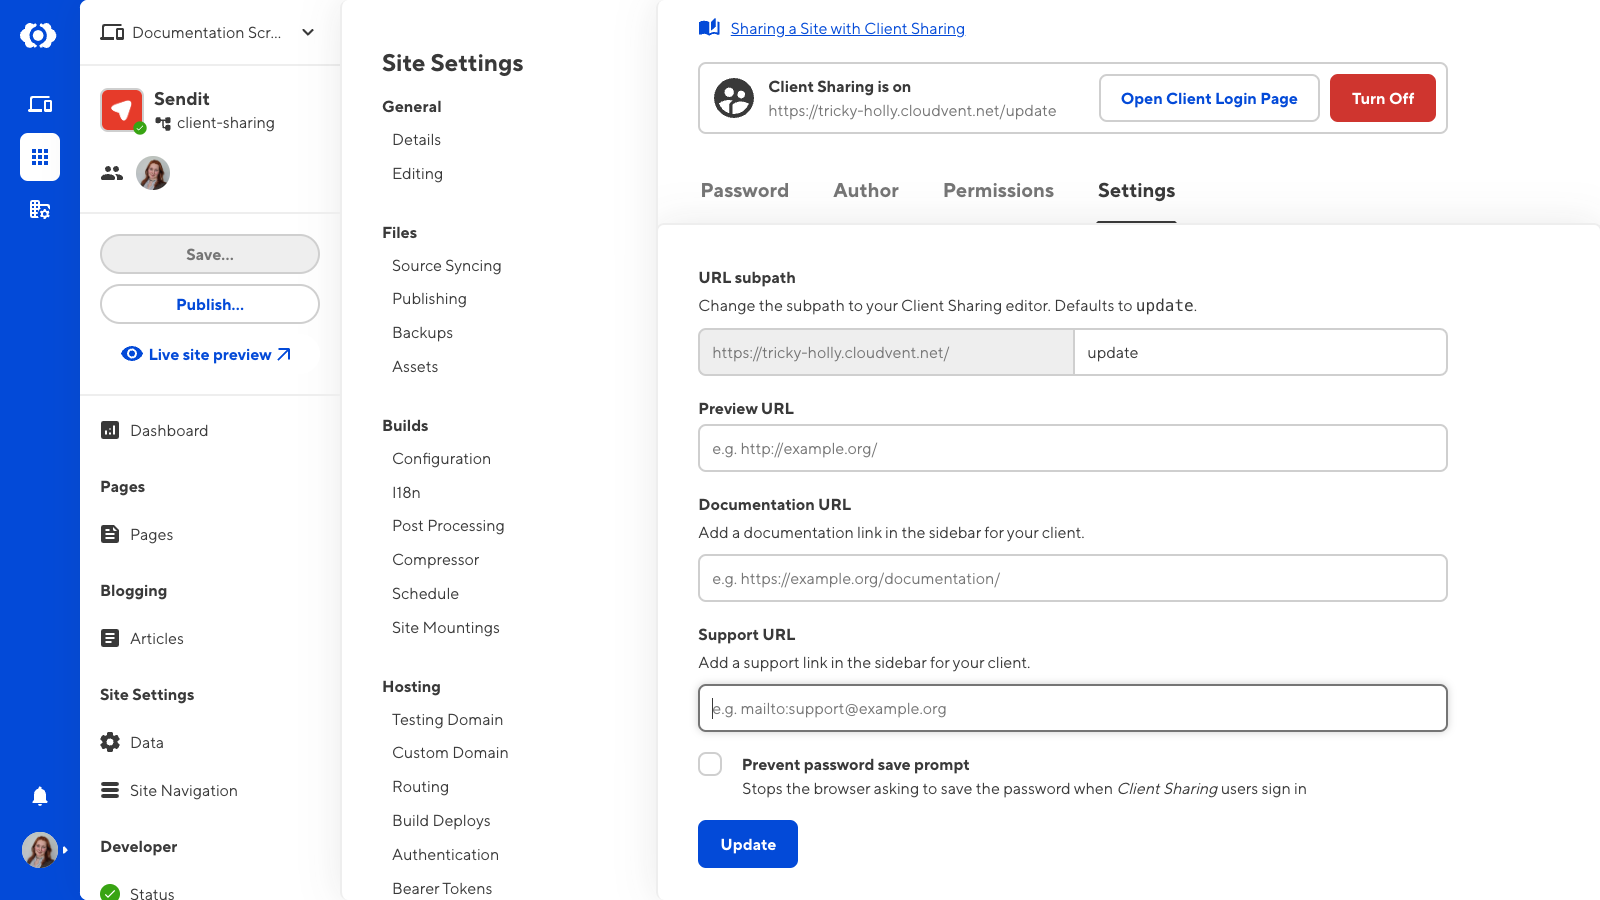 A screenshot of the Settings tab on the Client Sharing pages shows a field to update the URL subpath of your Client Login page and a checkbox to prevent browsers asking to save Client passwords.